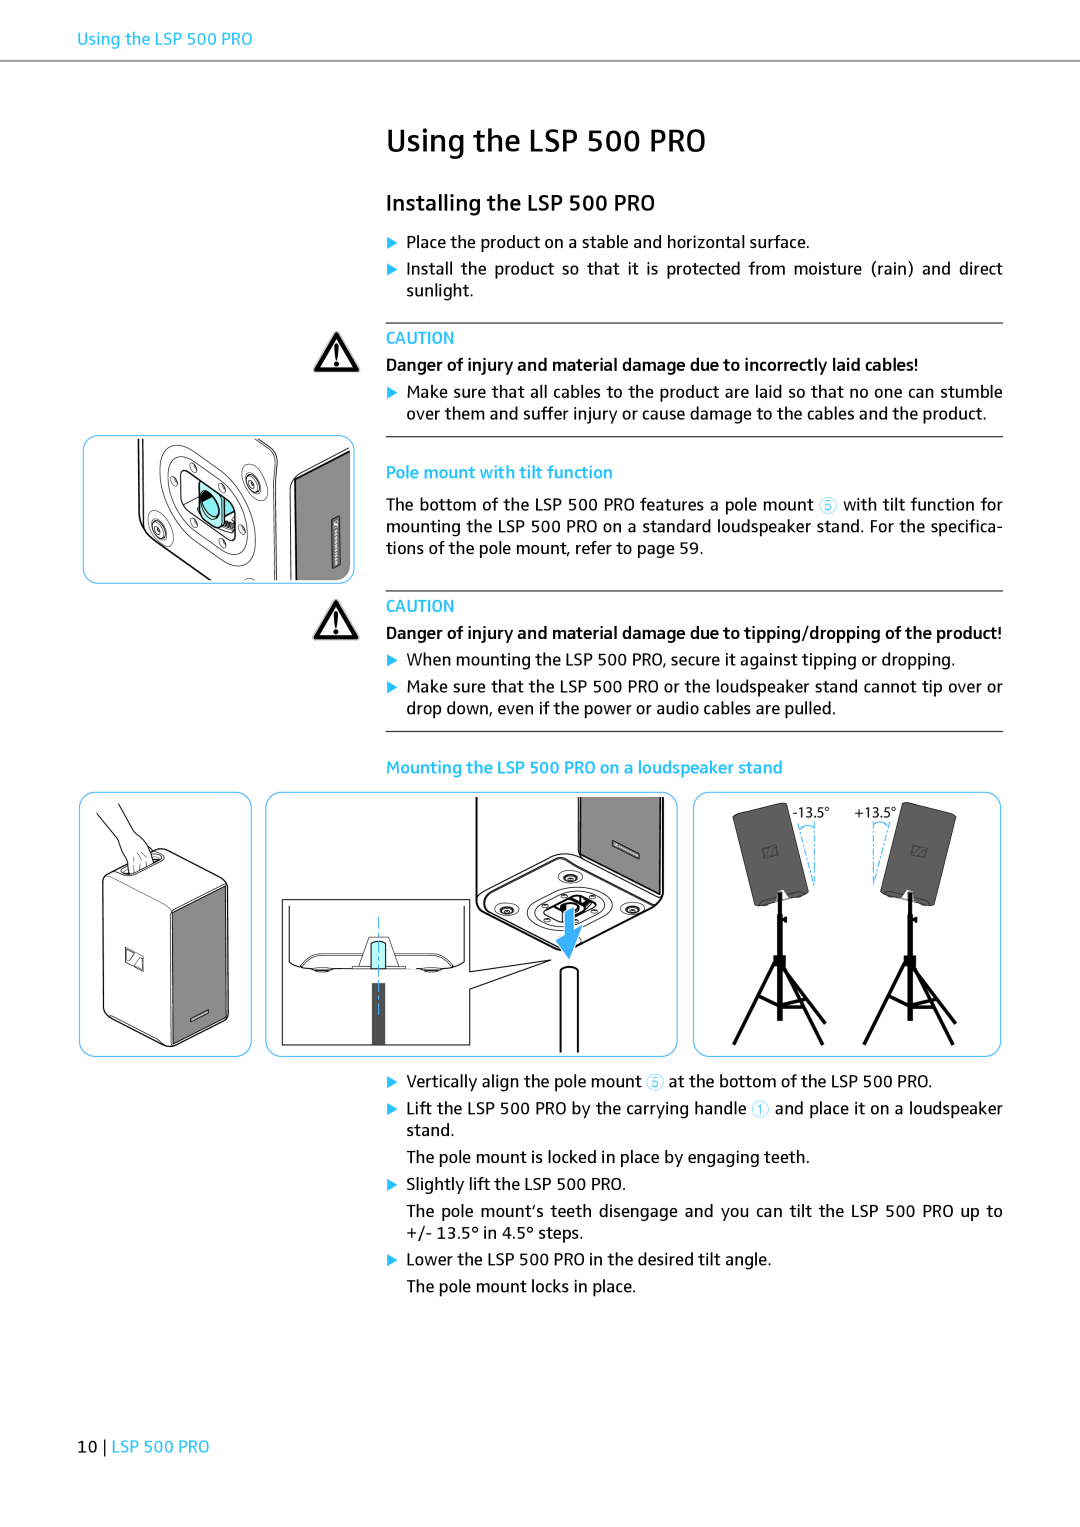 Sennheiser instruction manual Using the LSP 500 PRO, Installing the LSP 500 PRO, Pole mount with tilt function 